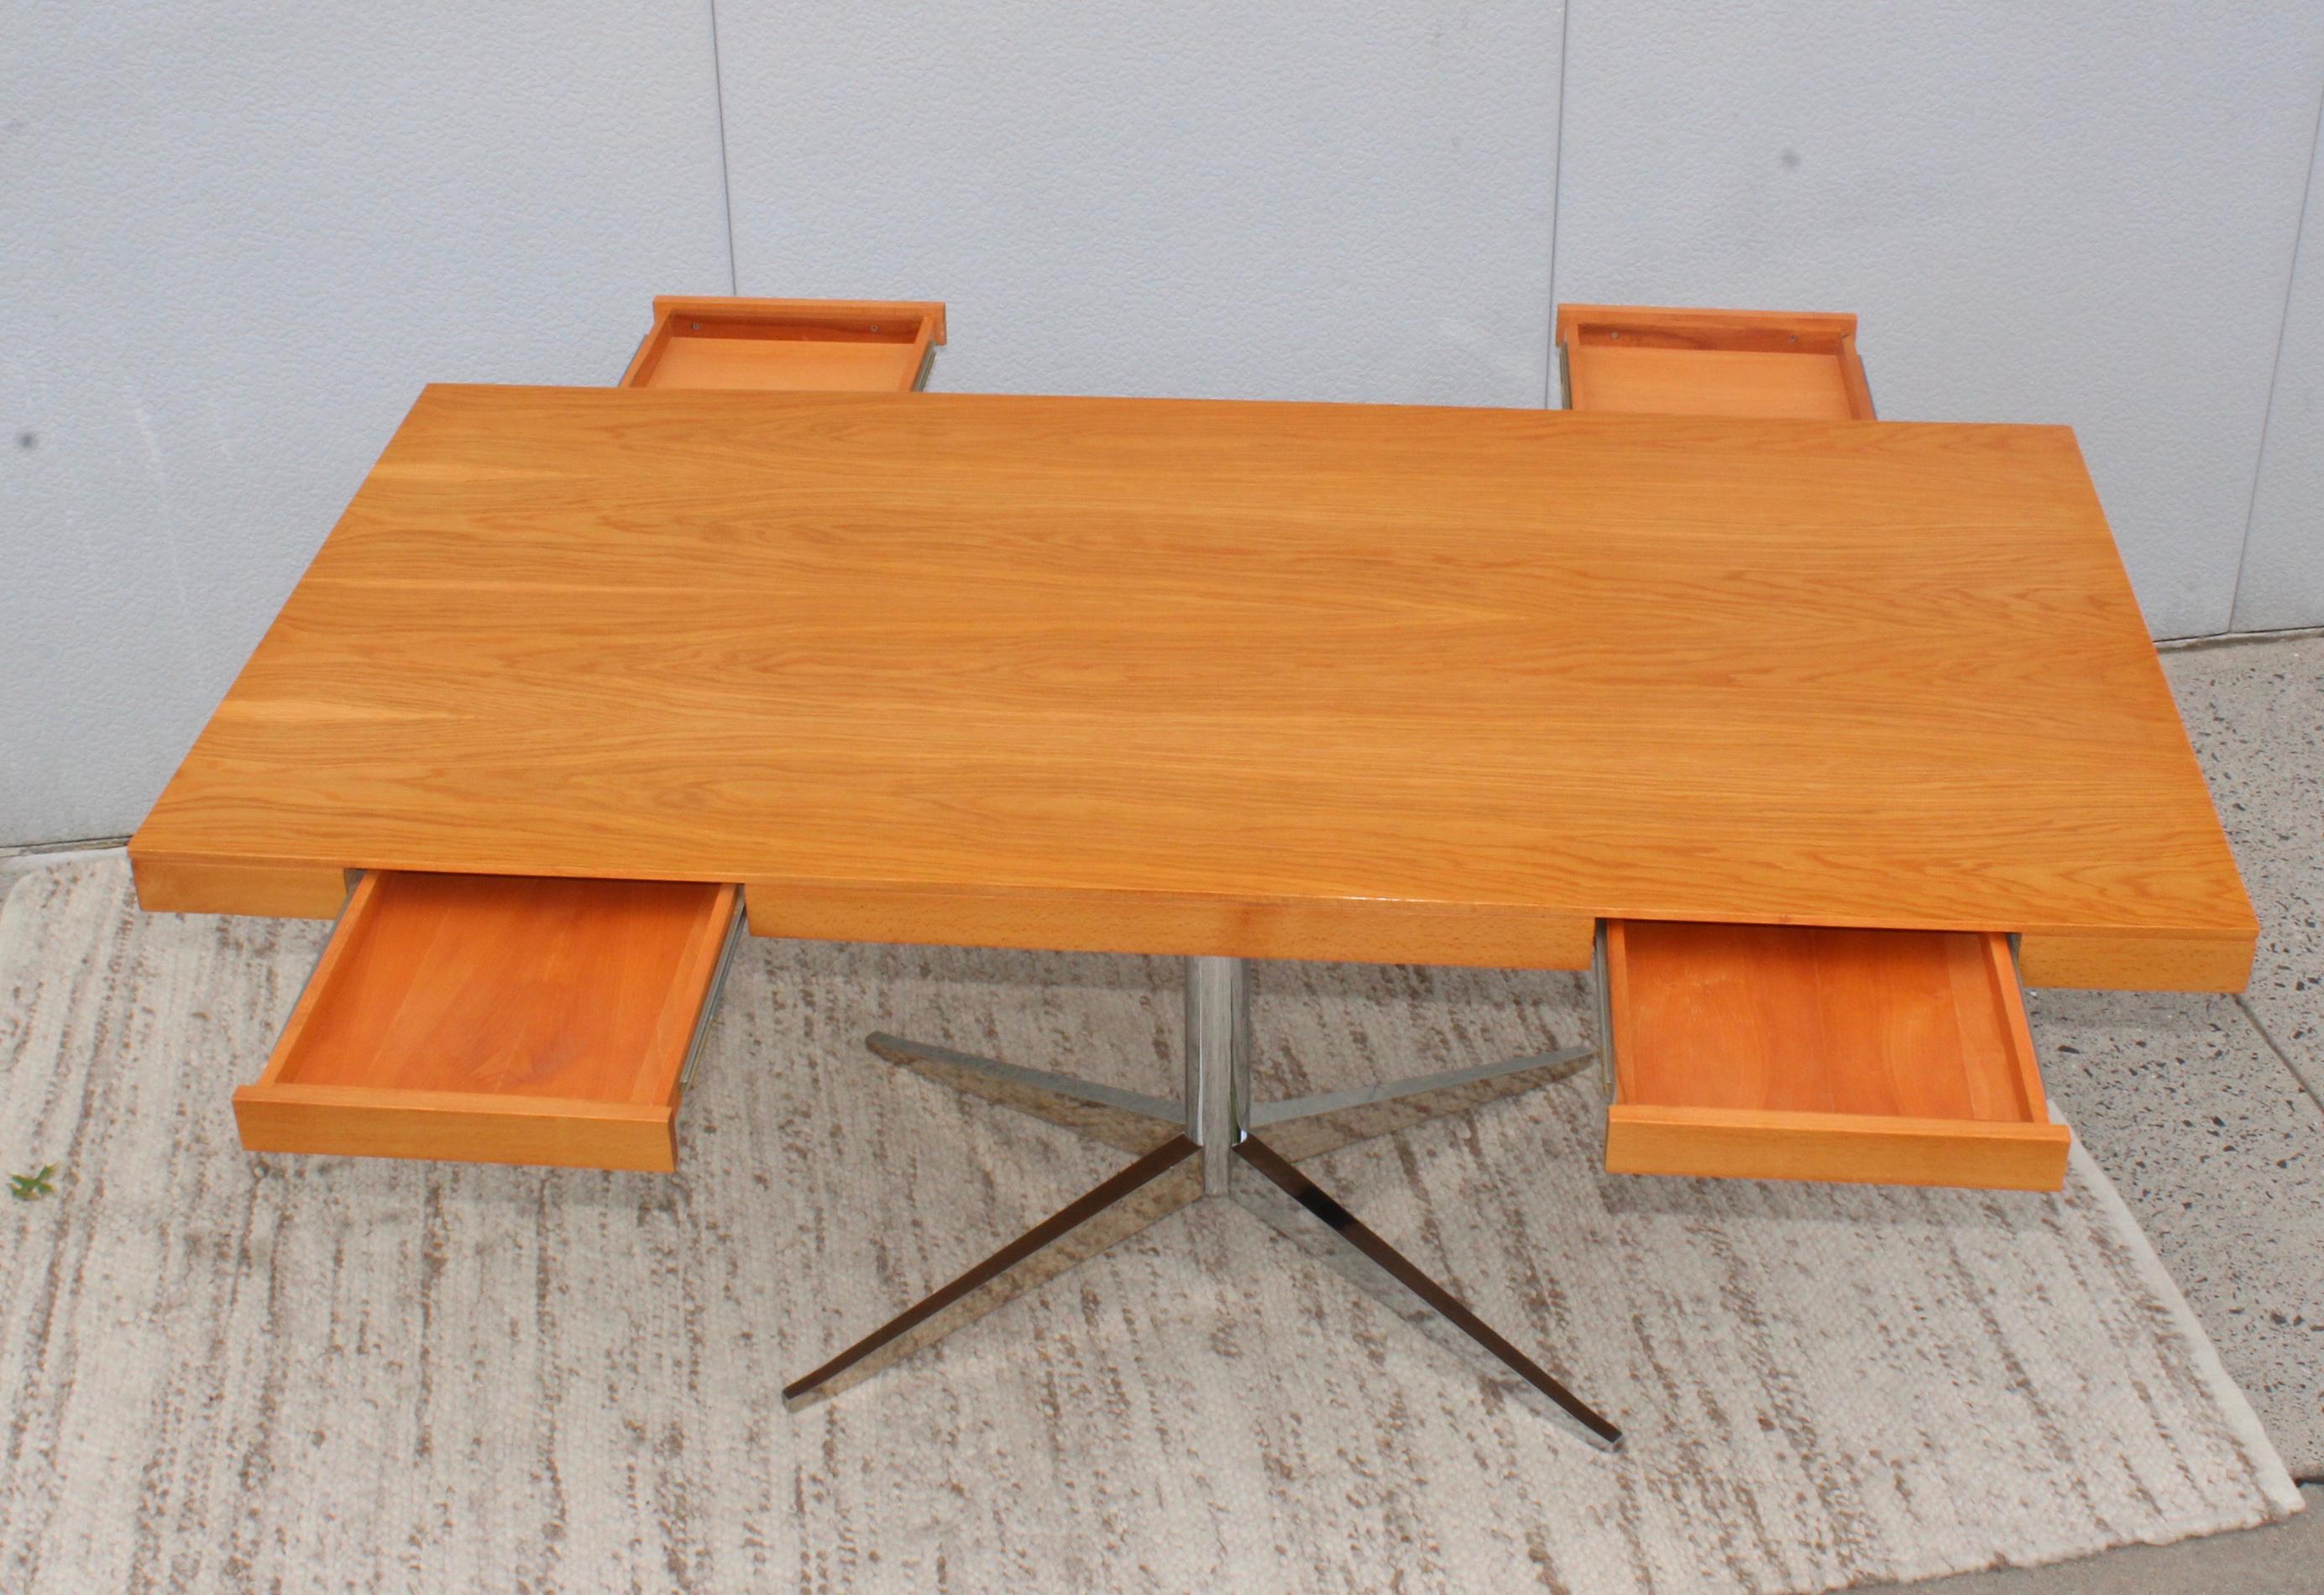 1980s Florence Knoll oak with plated steel base partners desk. With two drawers in each side.